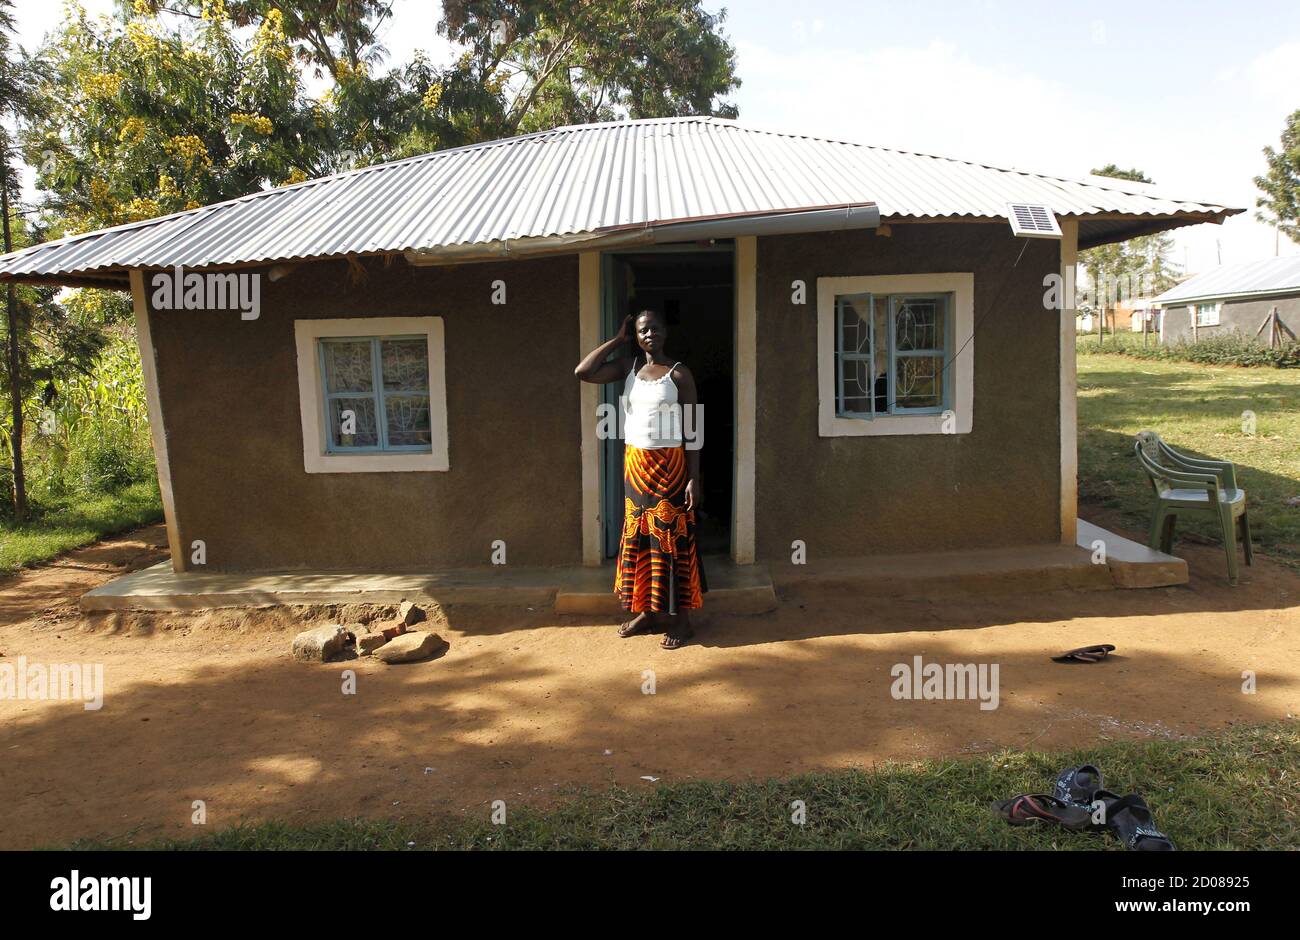 Peris Aoko, a 37-year-old housewife, poses for a photograph outside her home in Kogelo, west of Kenya's capital Nairobi, July 15, 2015. Aoko said, 'We expect the U.S. president to come home as a son of this land. Kogelo is the 53rd State of the United States of America.' As U.S. President Barack Obama visits Kenya, a personal connection to his father's birthplace of Kogelo dominates a trip that Kenyans view as a native son returning home. Residents from a herdsman to a housewife share their views on what Obama has achieved and what they would like to see next. REUTERS/Thomas Mukoya  PICTURE 4  Stock Photo